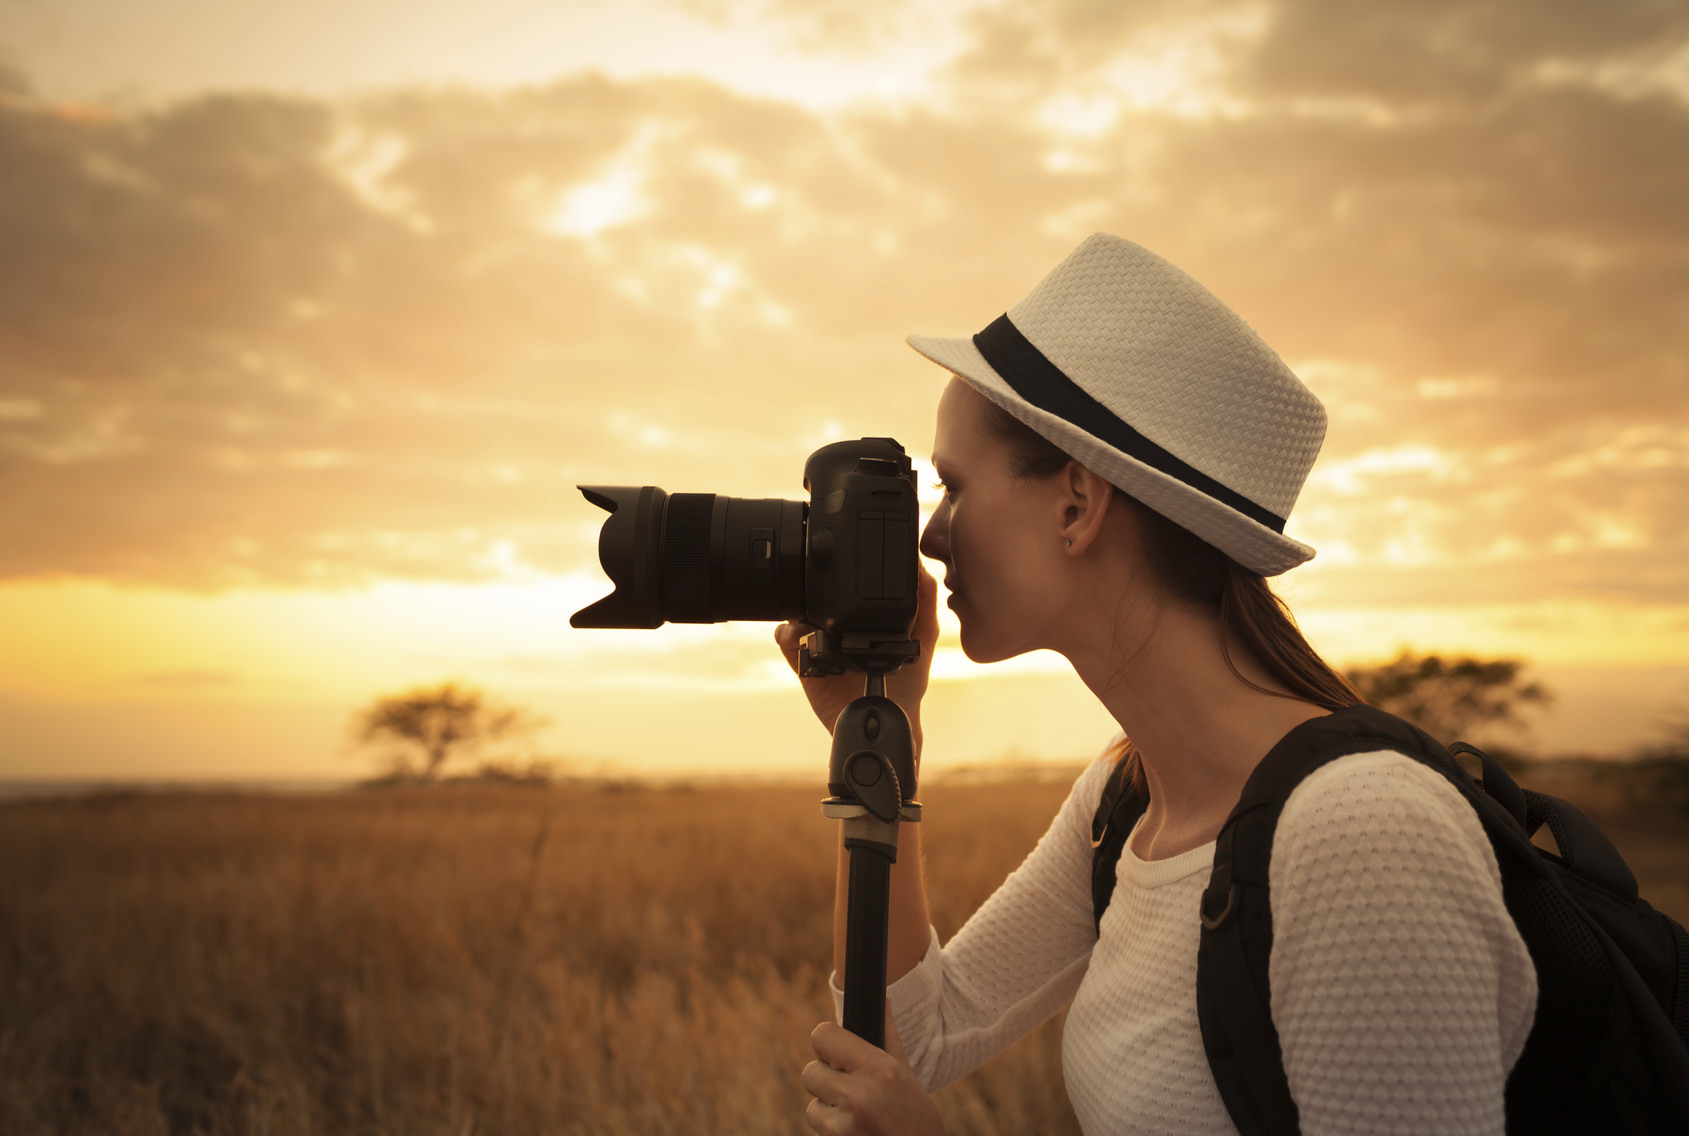 9 Early signs you’re going to be a great photographer